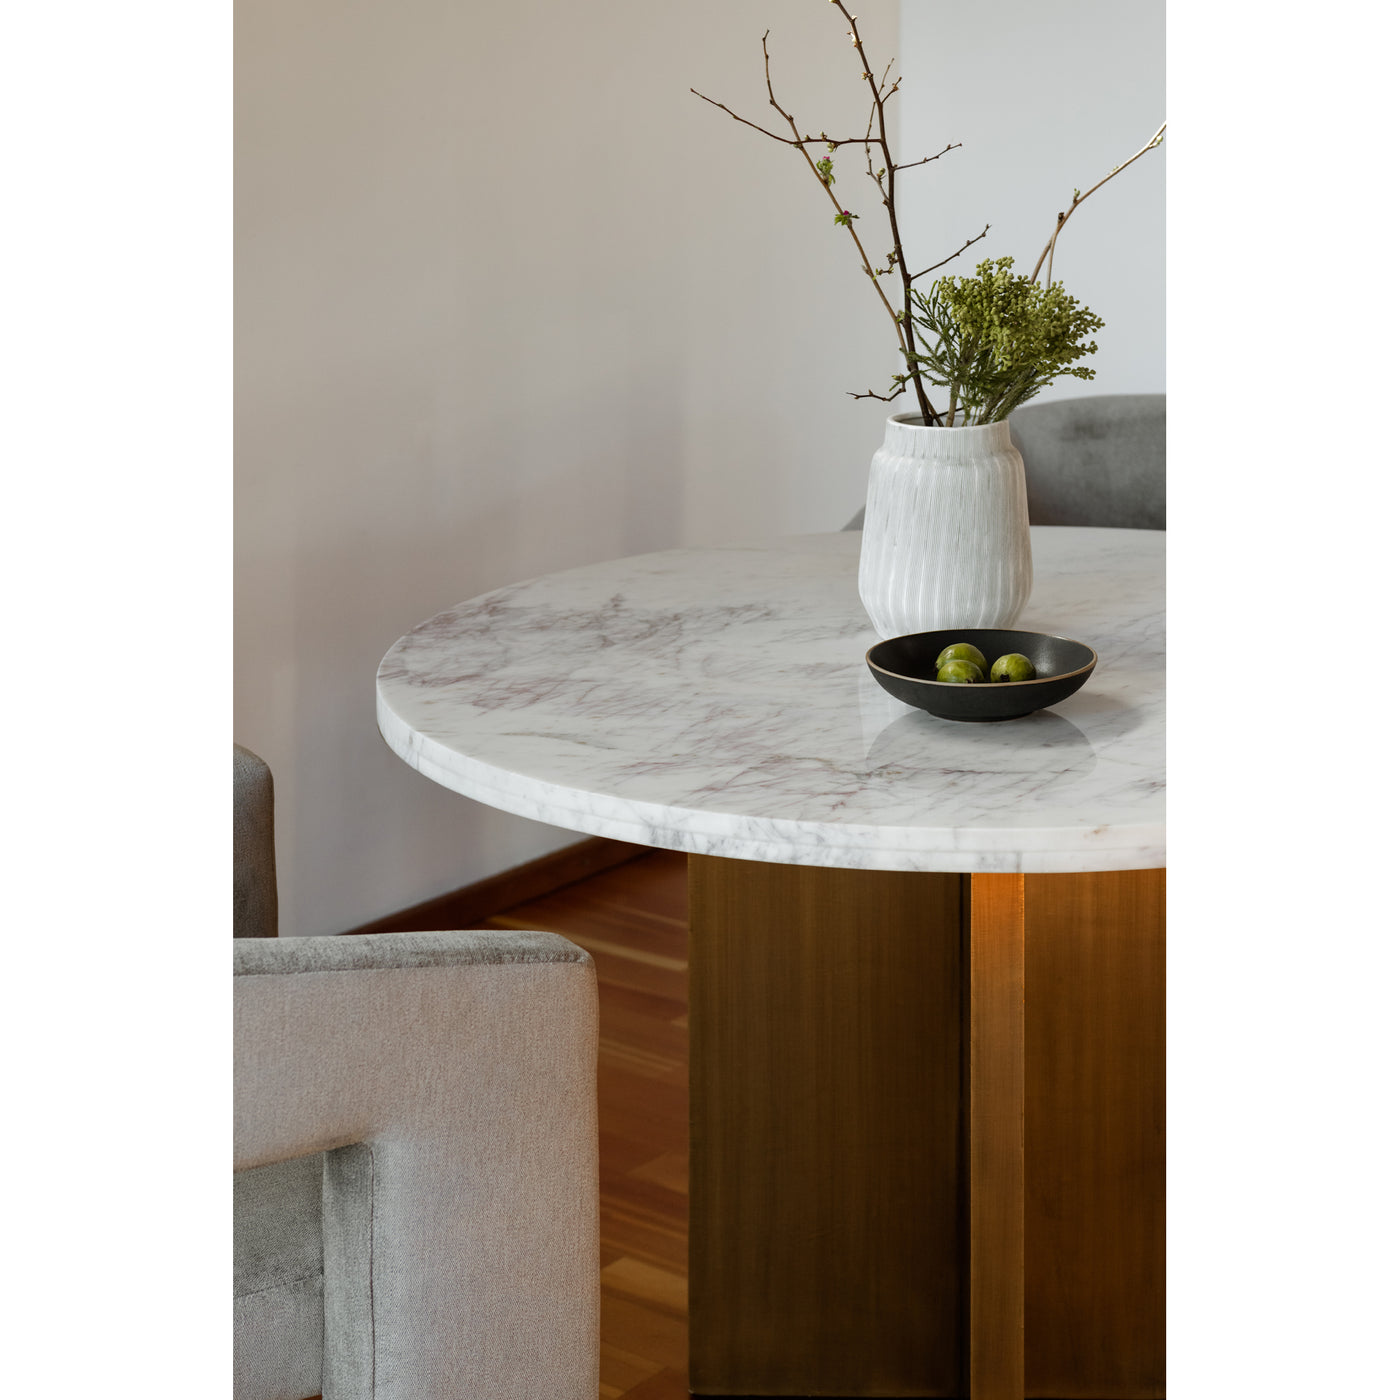 Grace your dining room with the remarkable and contemporary style of the Graze dining table. The sleek white marble top an...